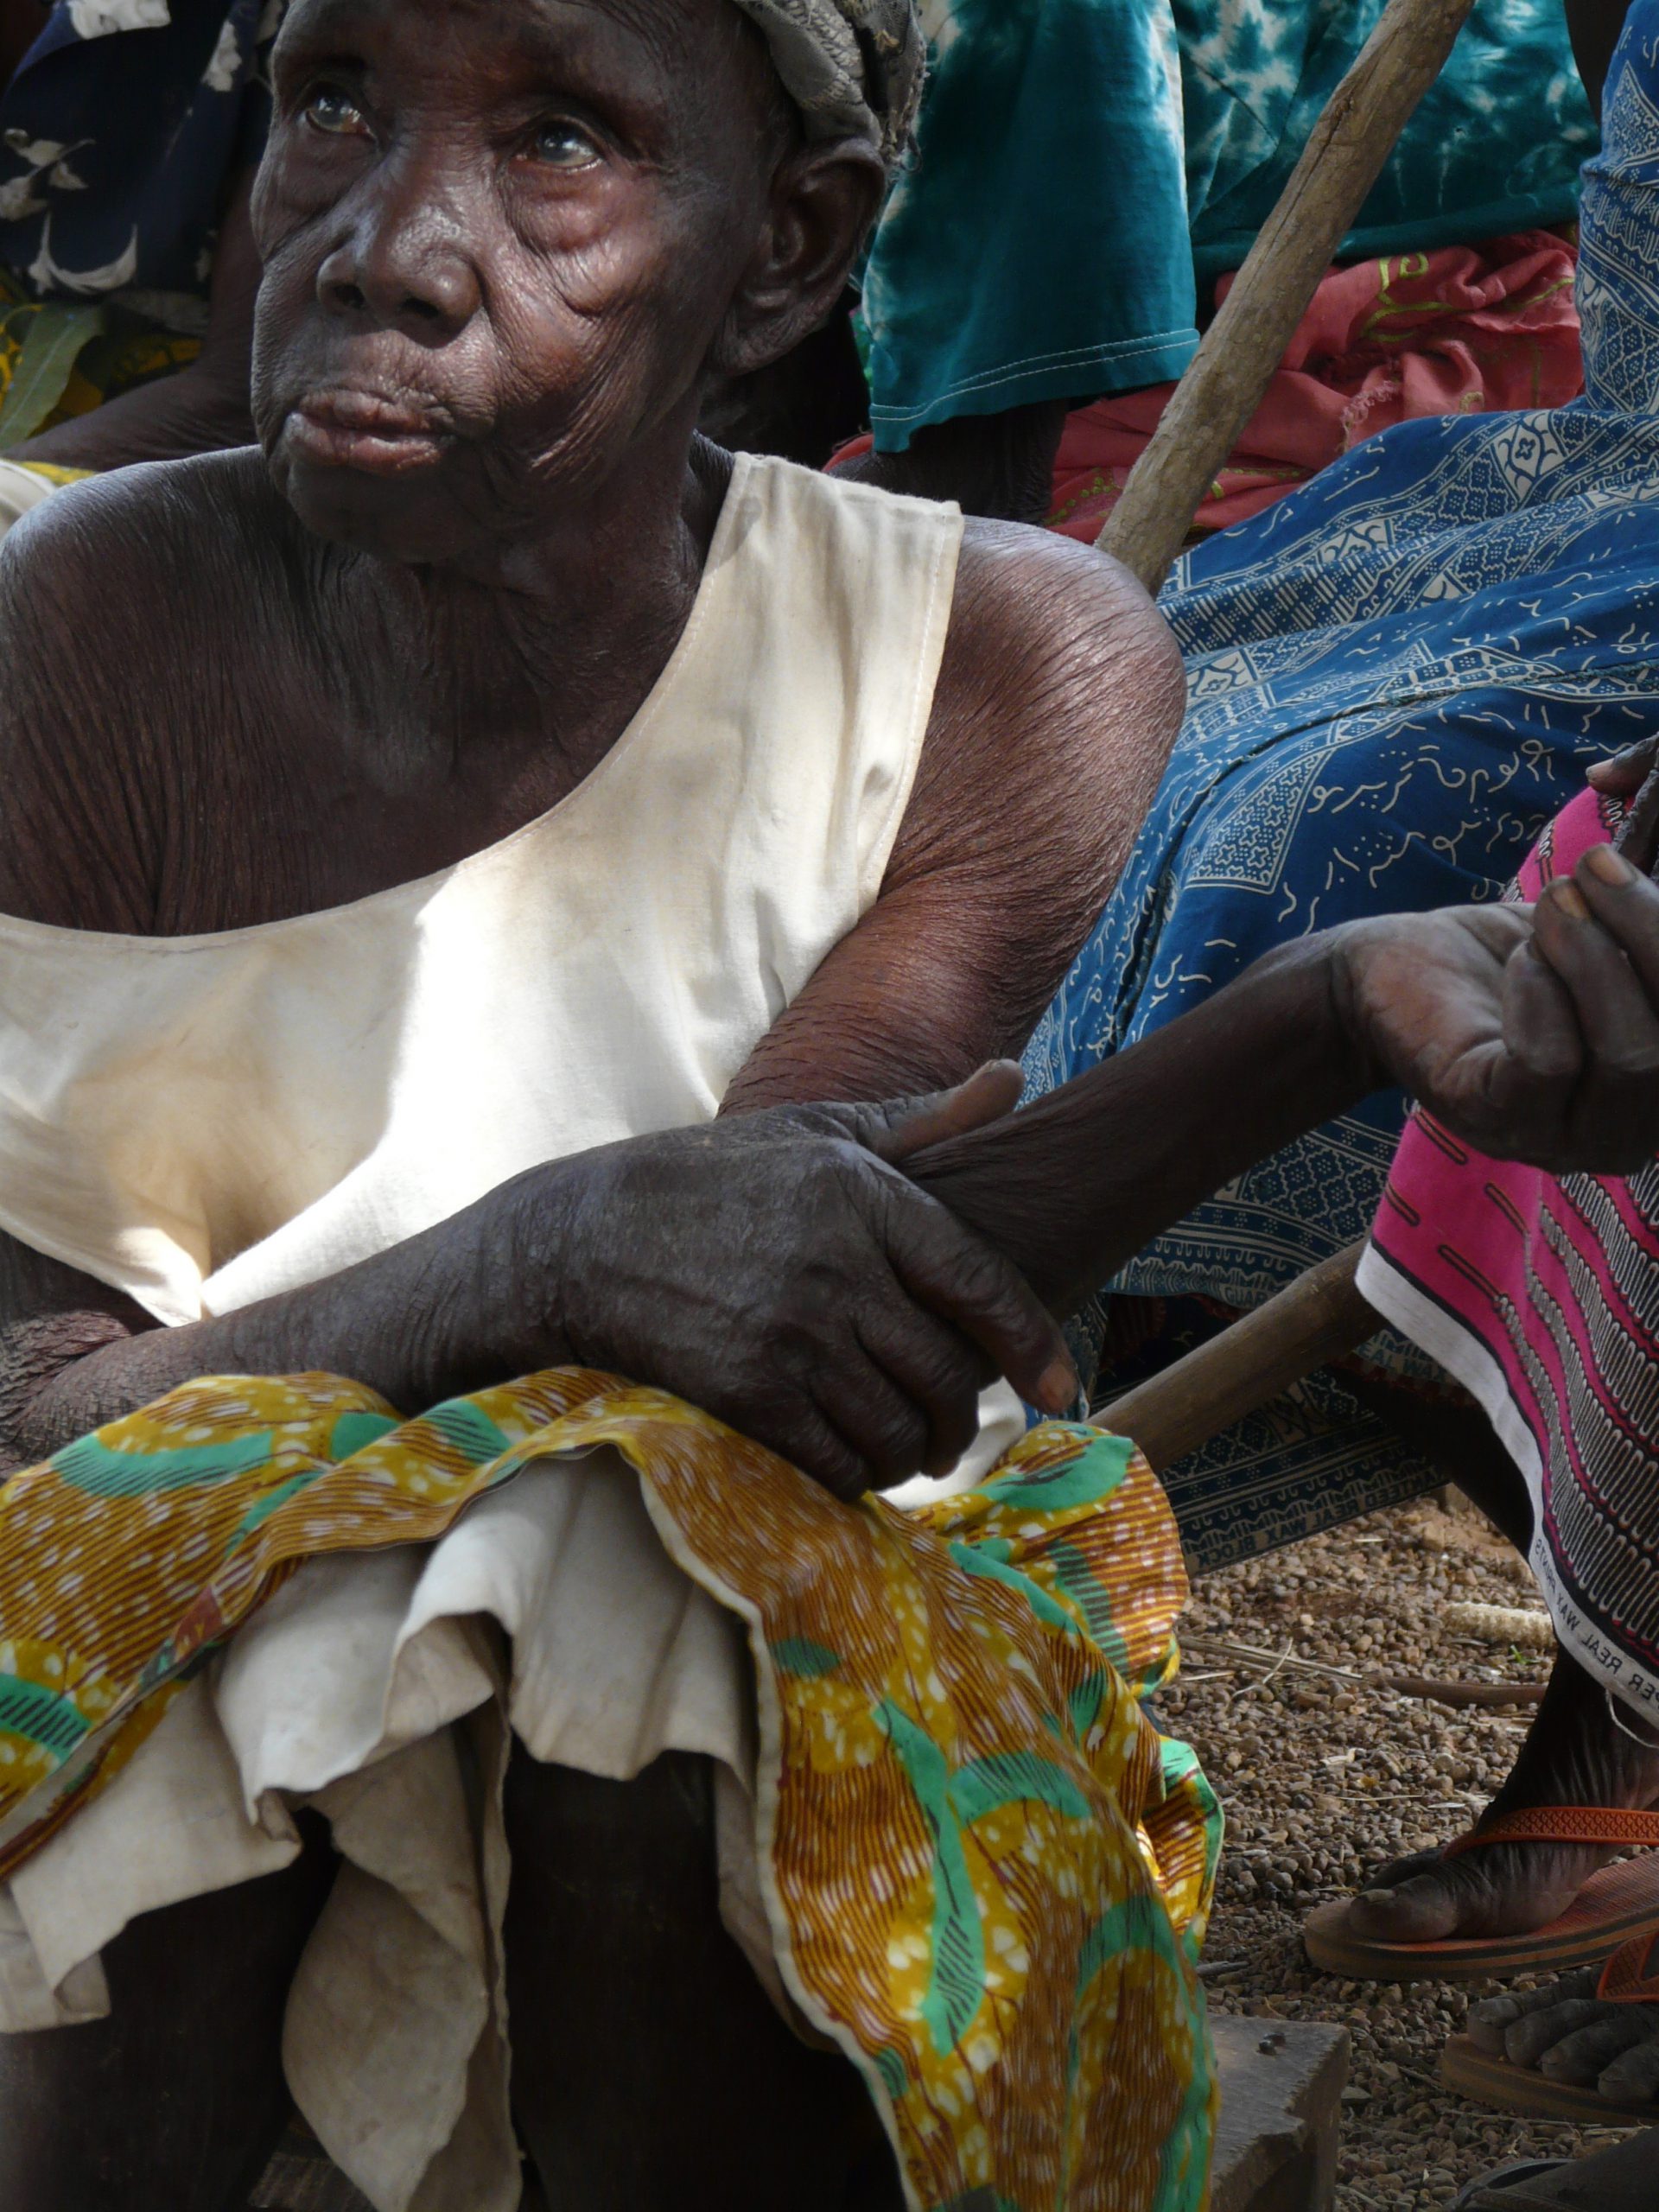 Women accused of witchcraft, Securing the safety and dignity of women accused of witch craft